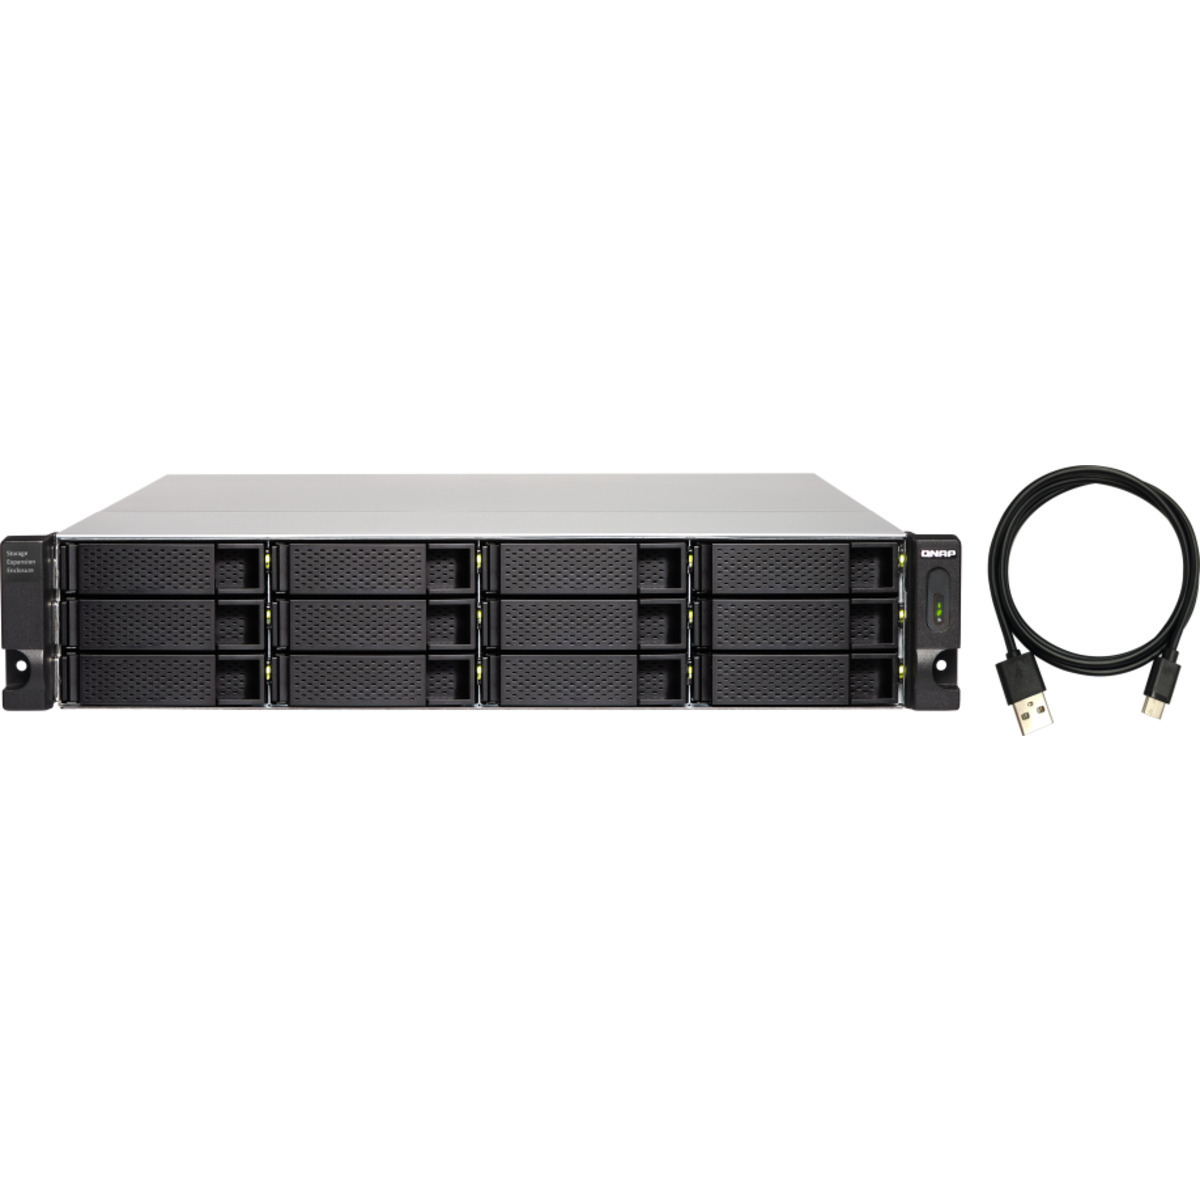 buy QNAP TL-R1200C-RP External Expansion Drive 264tb RackMount Expansion Enclosure 12x22000gb Western Digital Ultrastar HC570 WUH722222ALE6L4 3.5 7200rpm SATA 6Gb/s HDD ENTERPRISE Class Drives Installed - Burn-In Tested - nas headquarters buy network attached storage server device das new raid-5 free shipping simply usa TL-R1200C-RP External Expansion Drive